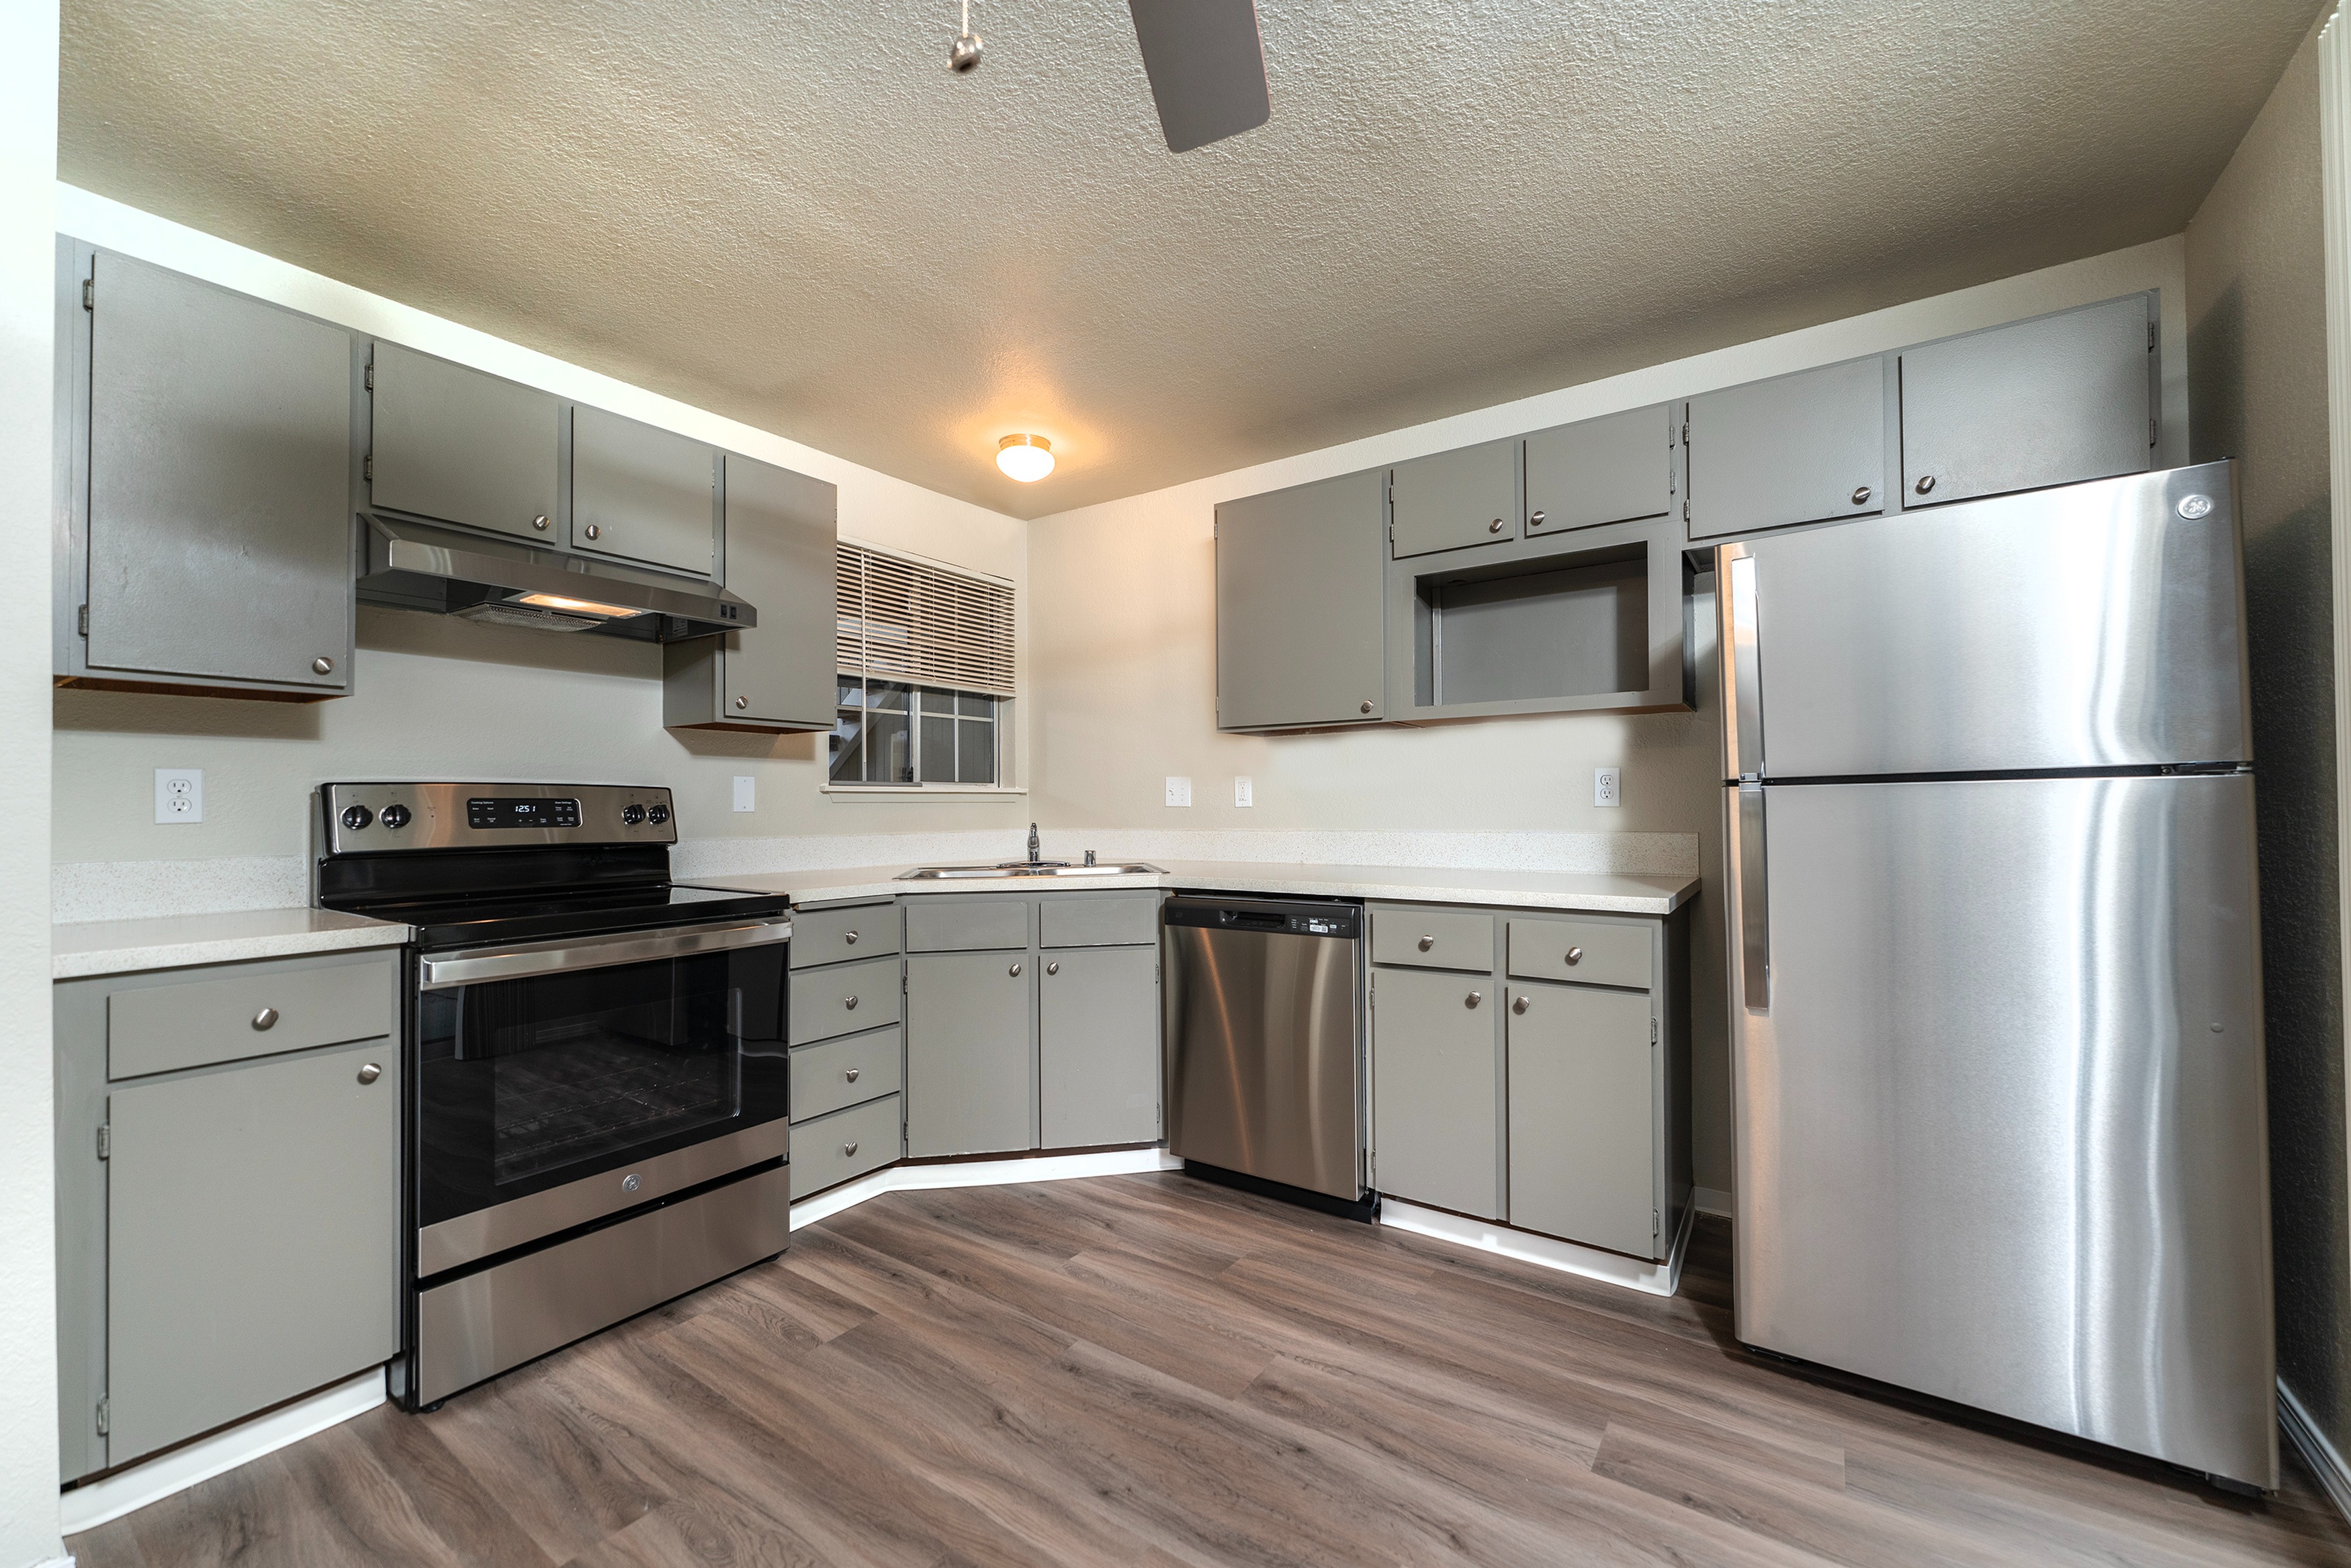 1x1 Stainless Steel Appliances